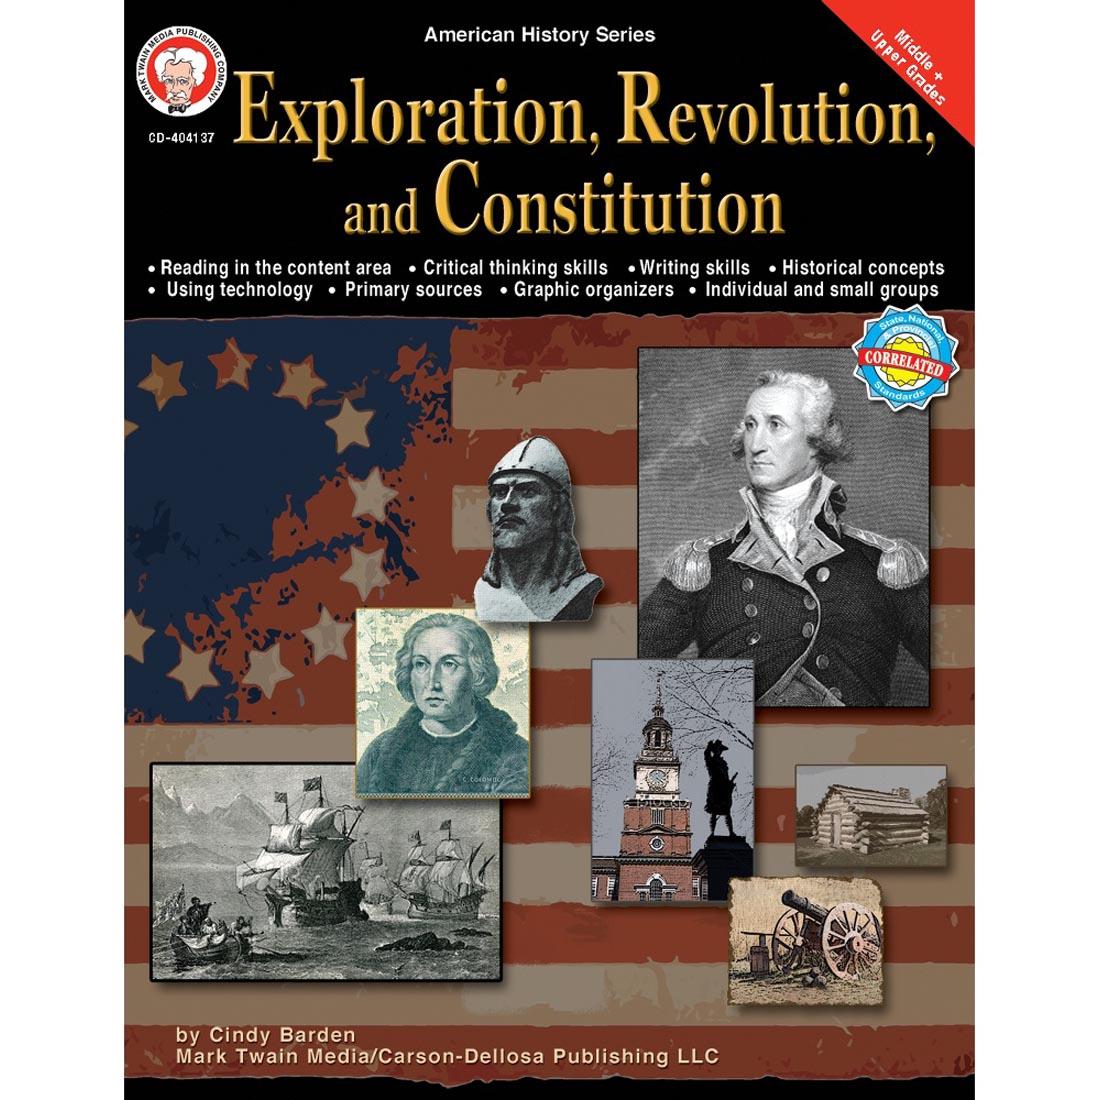 Exploration, Revolution, and Constitution American History Series by Mark Twain Media